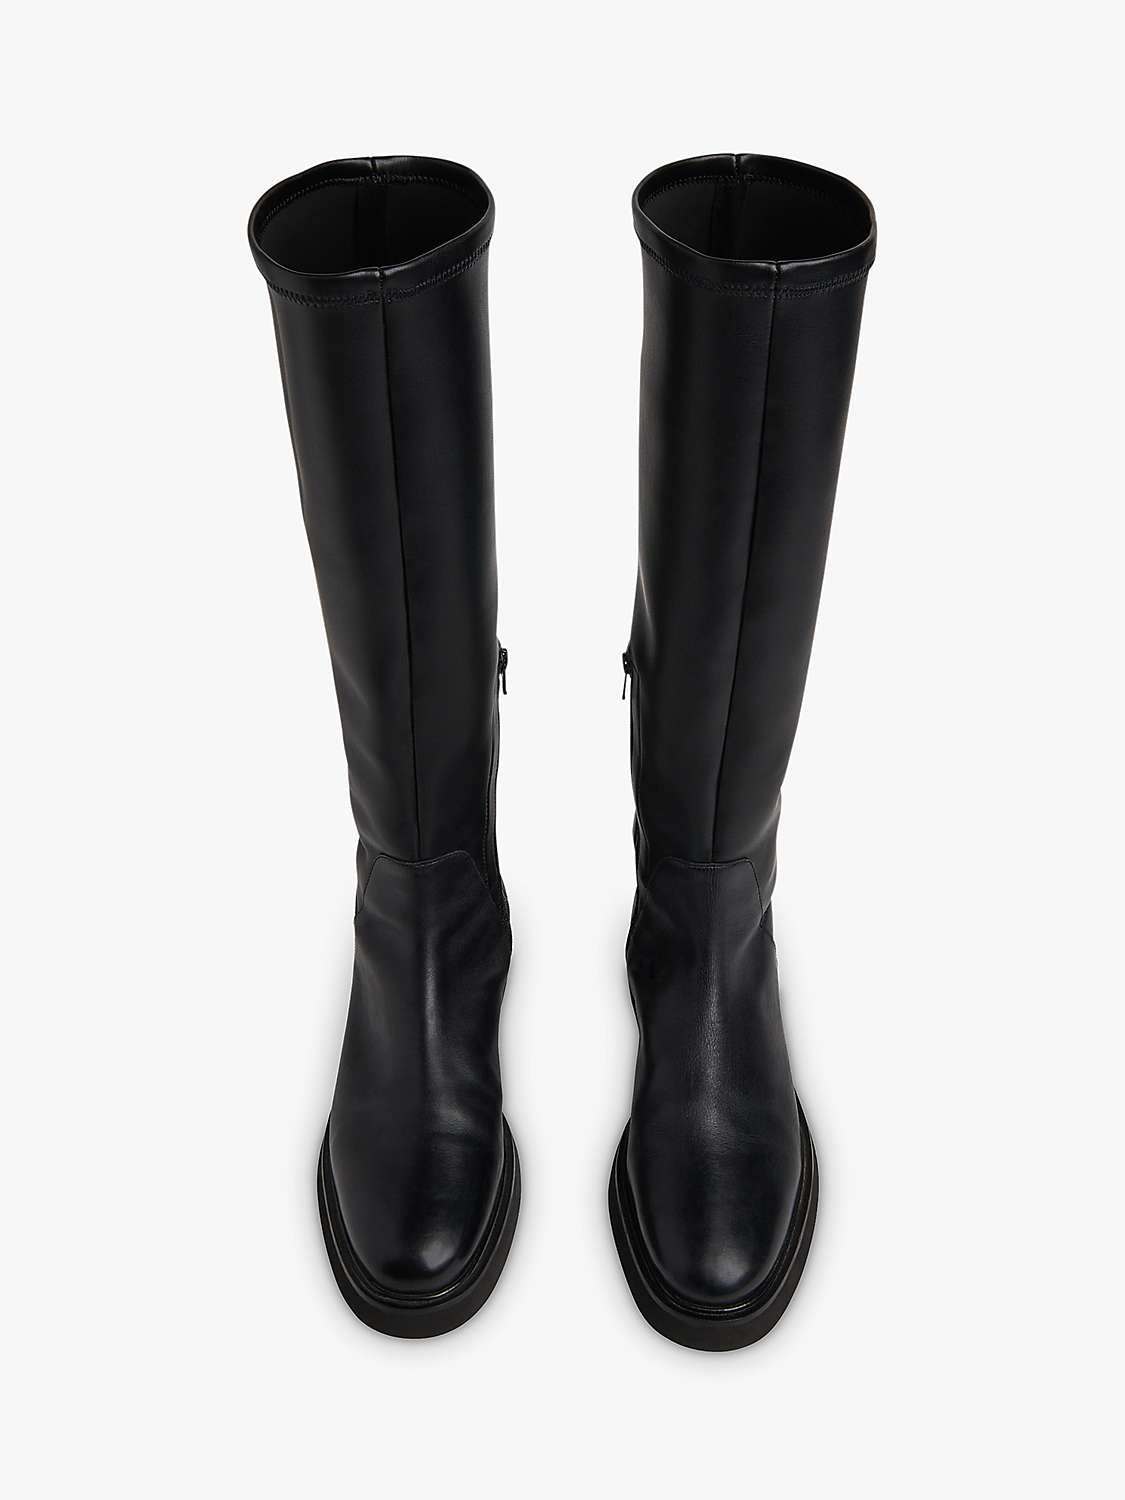 Buy Whistles Quin Leather Stretch Knee High Boots, Black Online at johnlewis.com